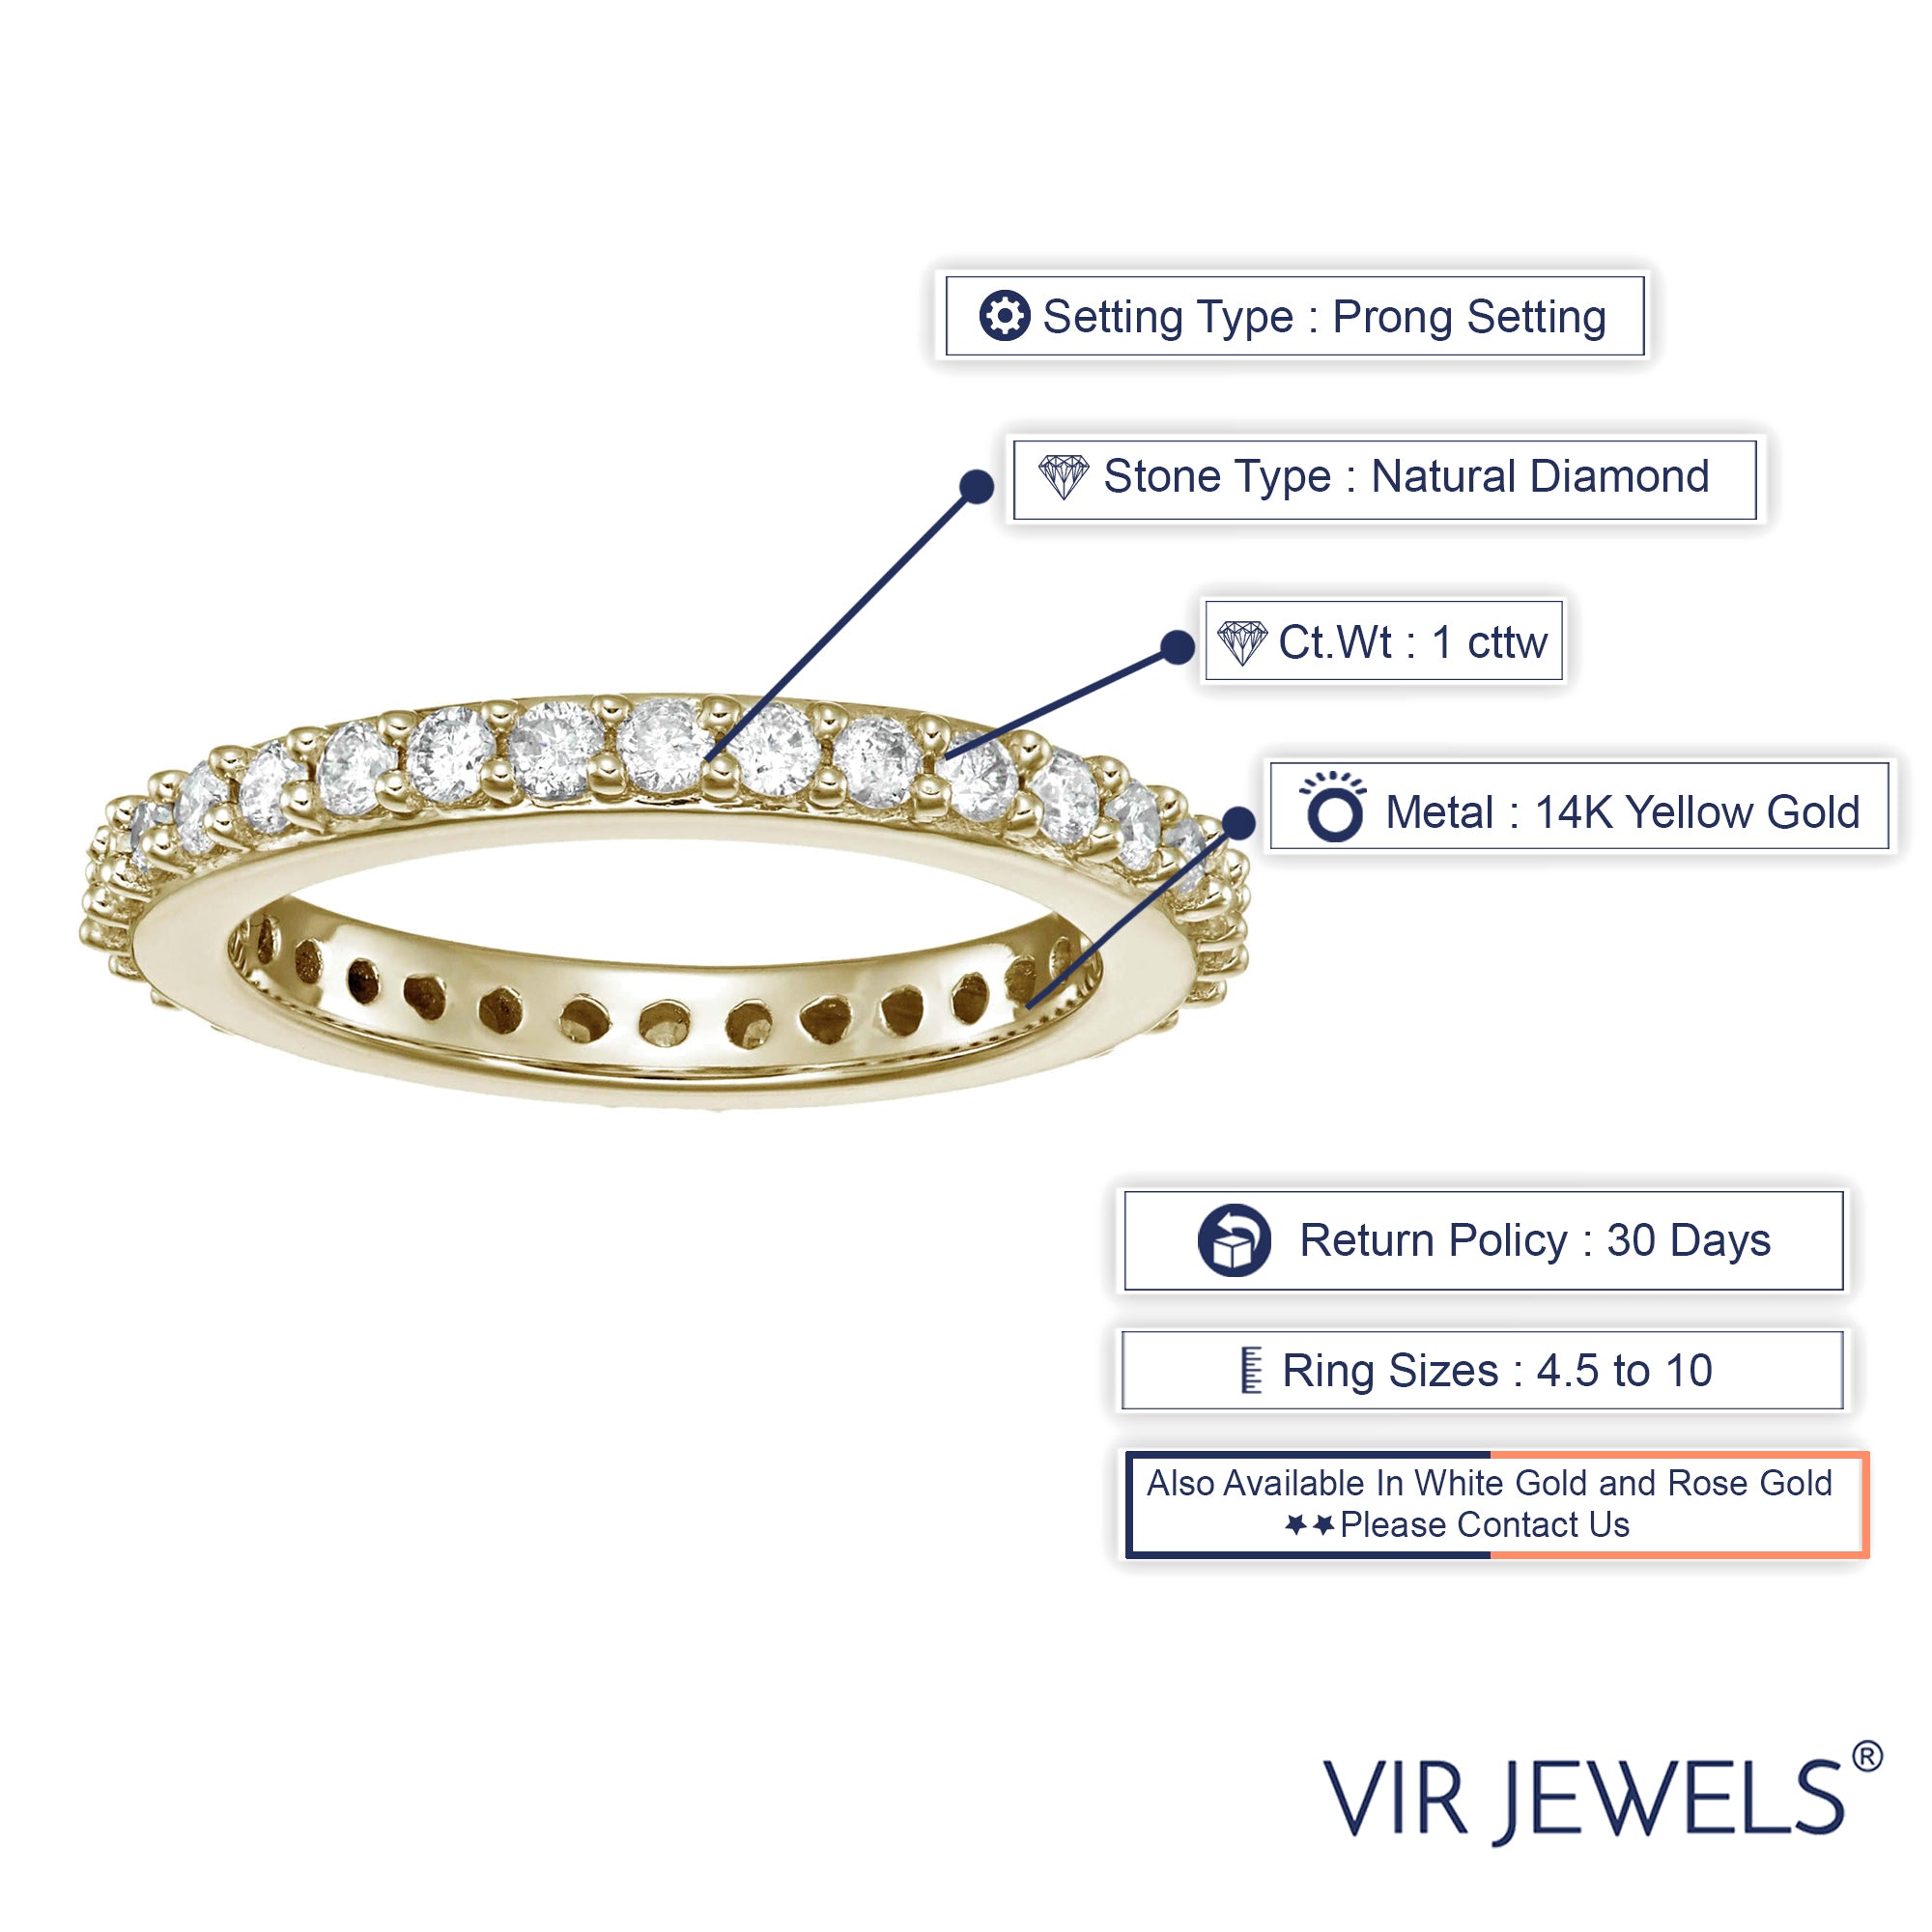 1 cttw Diamond Eternity Ring for Women, Wedding Band in 14K Yellow Gold Prong Set, Size 4.5-9